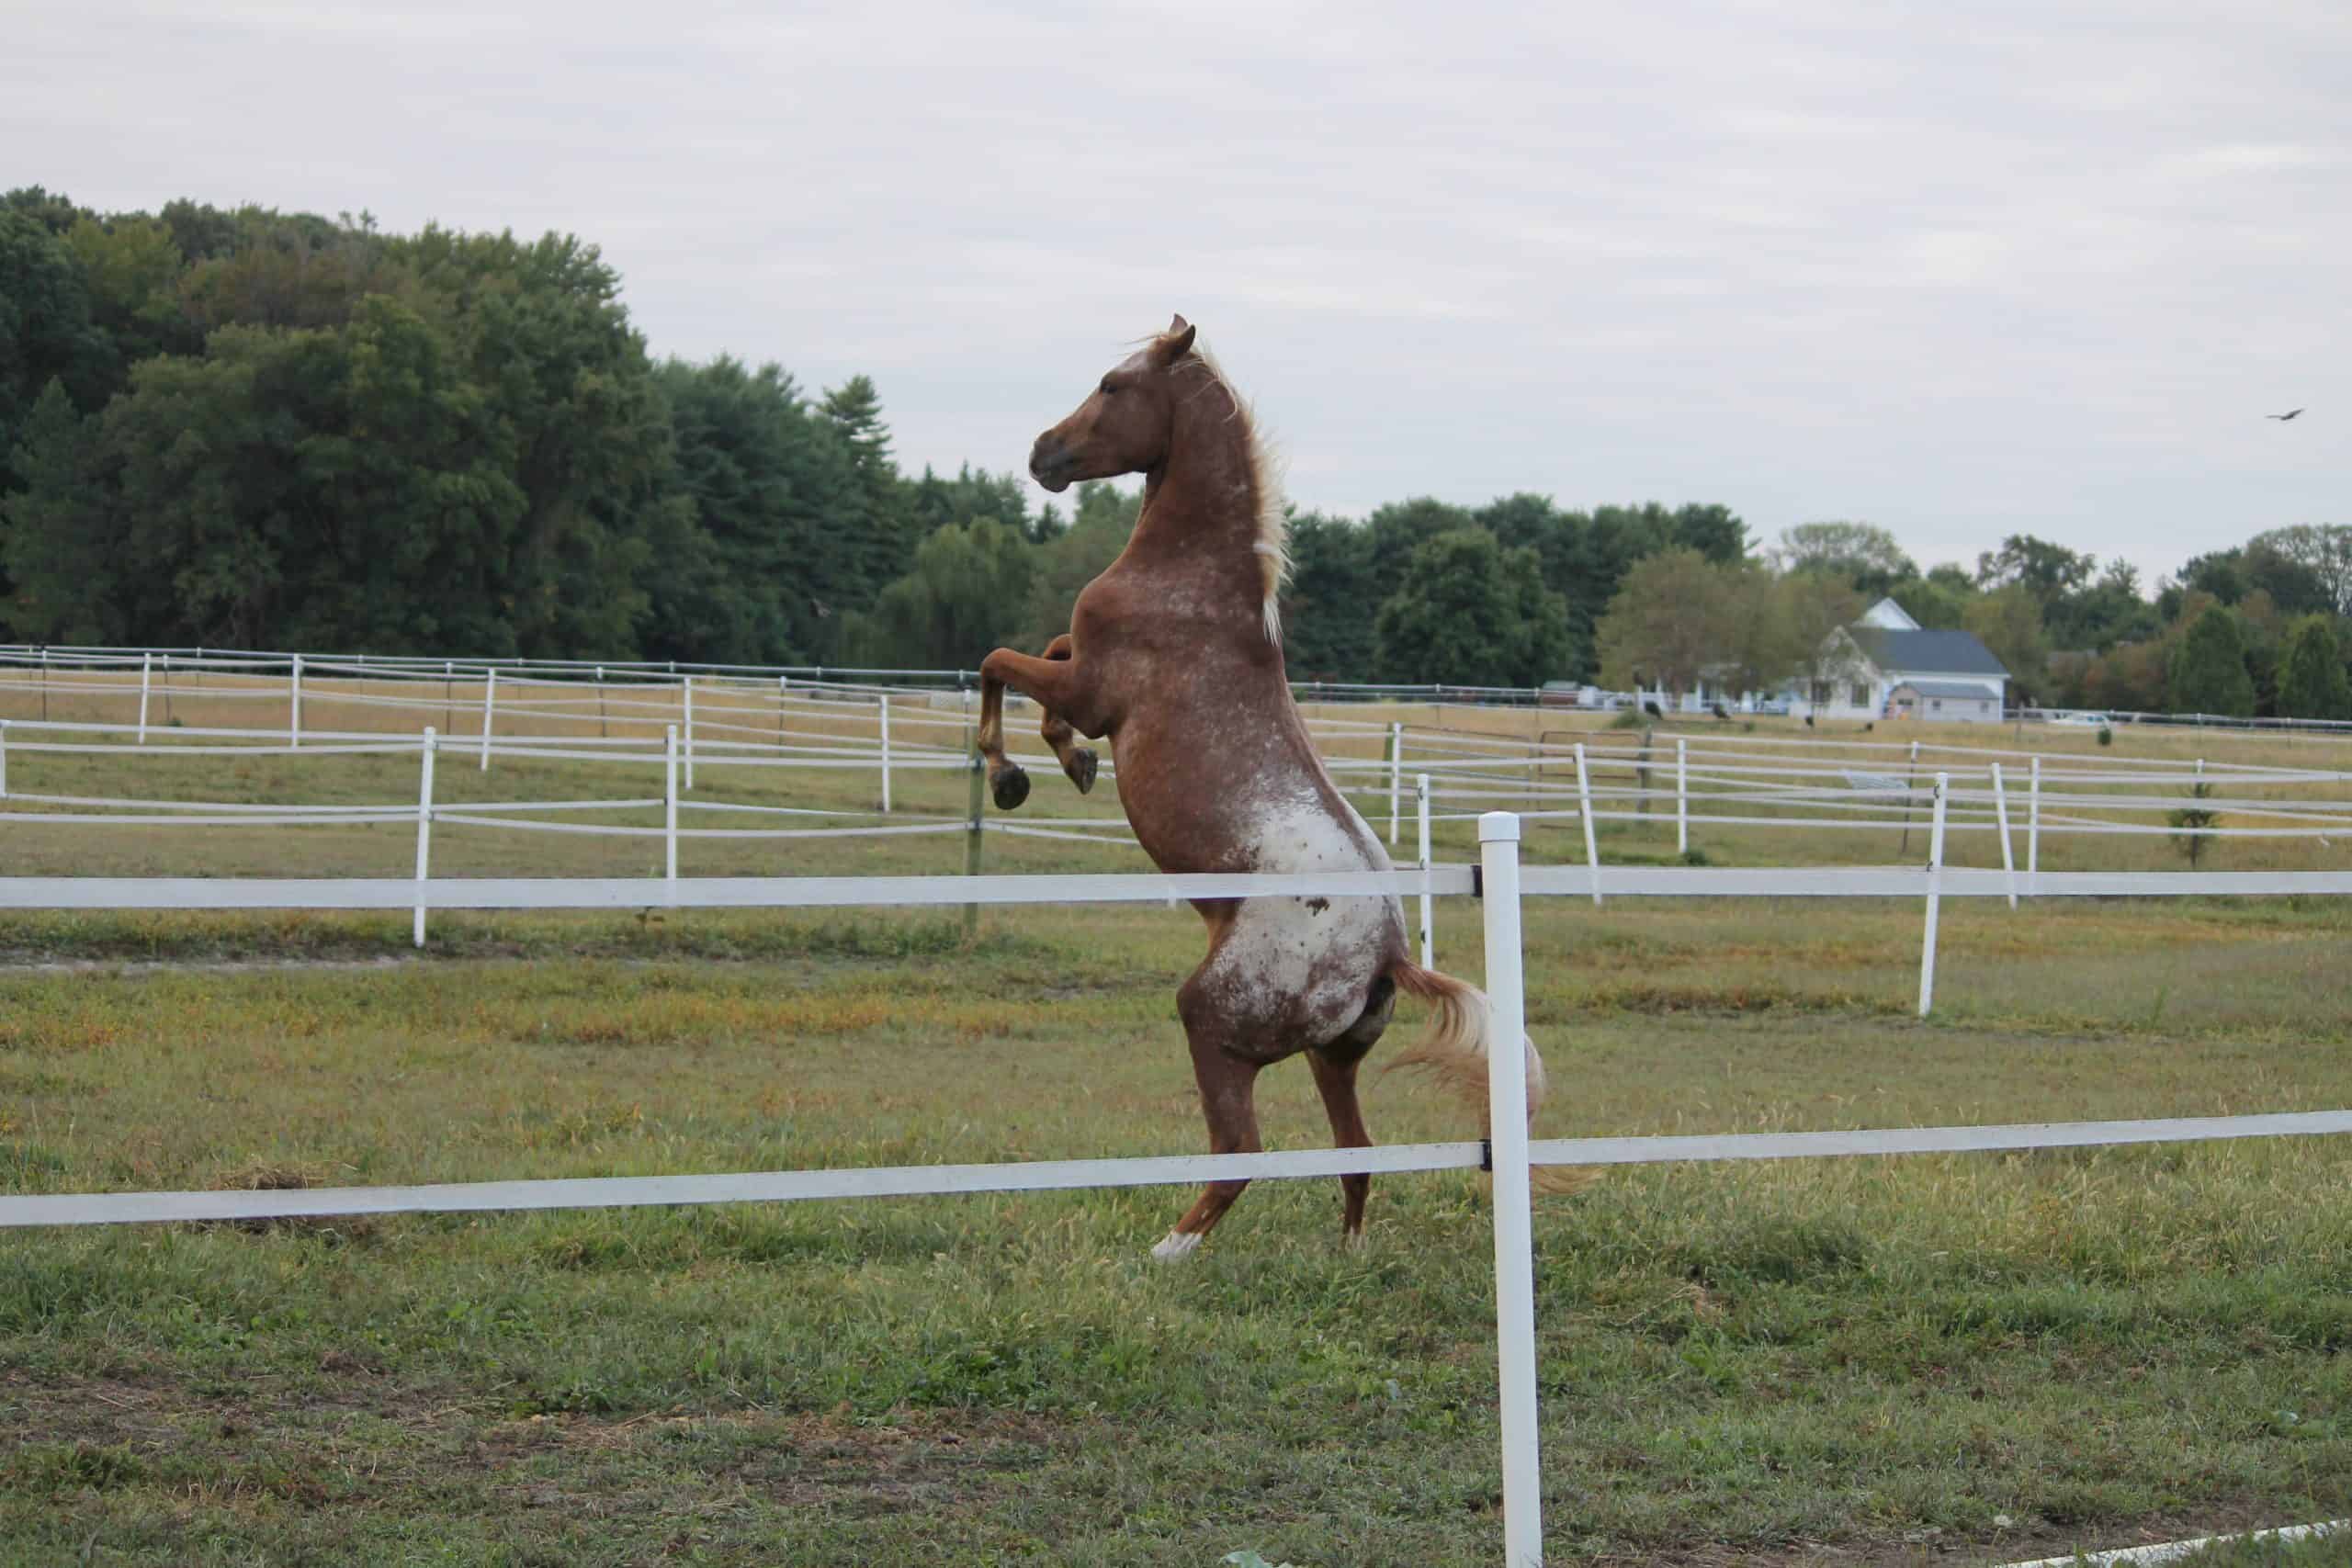 Frisky young Appaloosa horse rears up on hind legs in fenced pasture. White electric fencing separates the pastures.